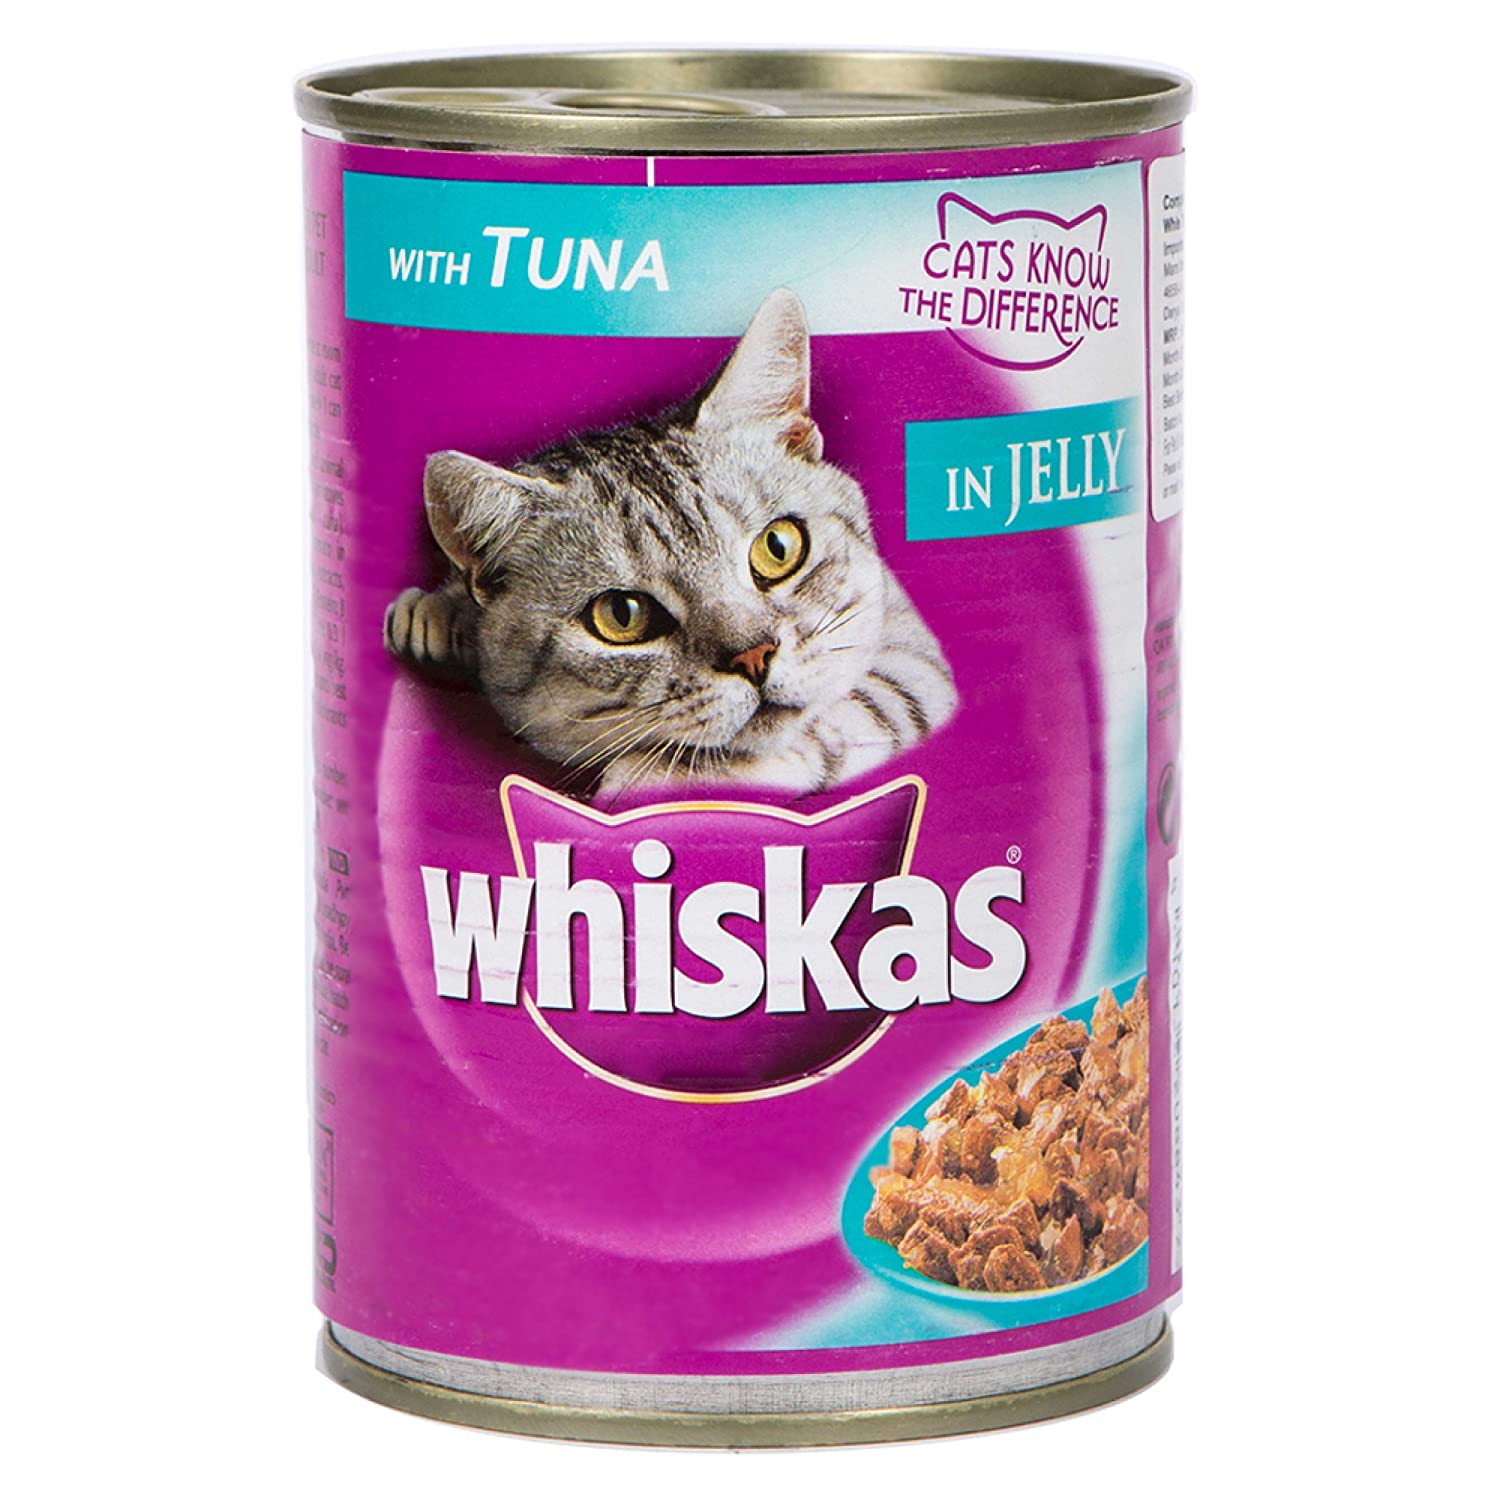 Whiskas - With Tuna in Jelly Tin